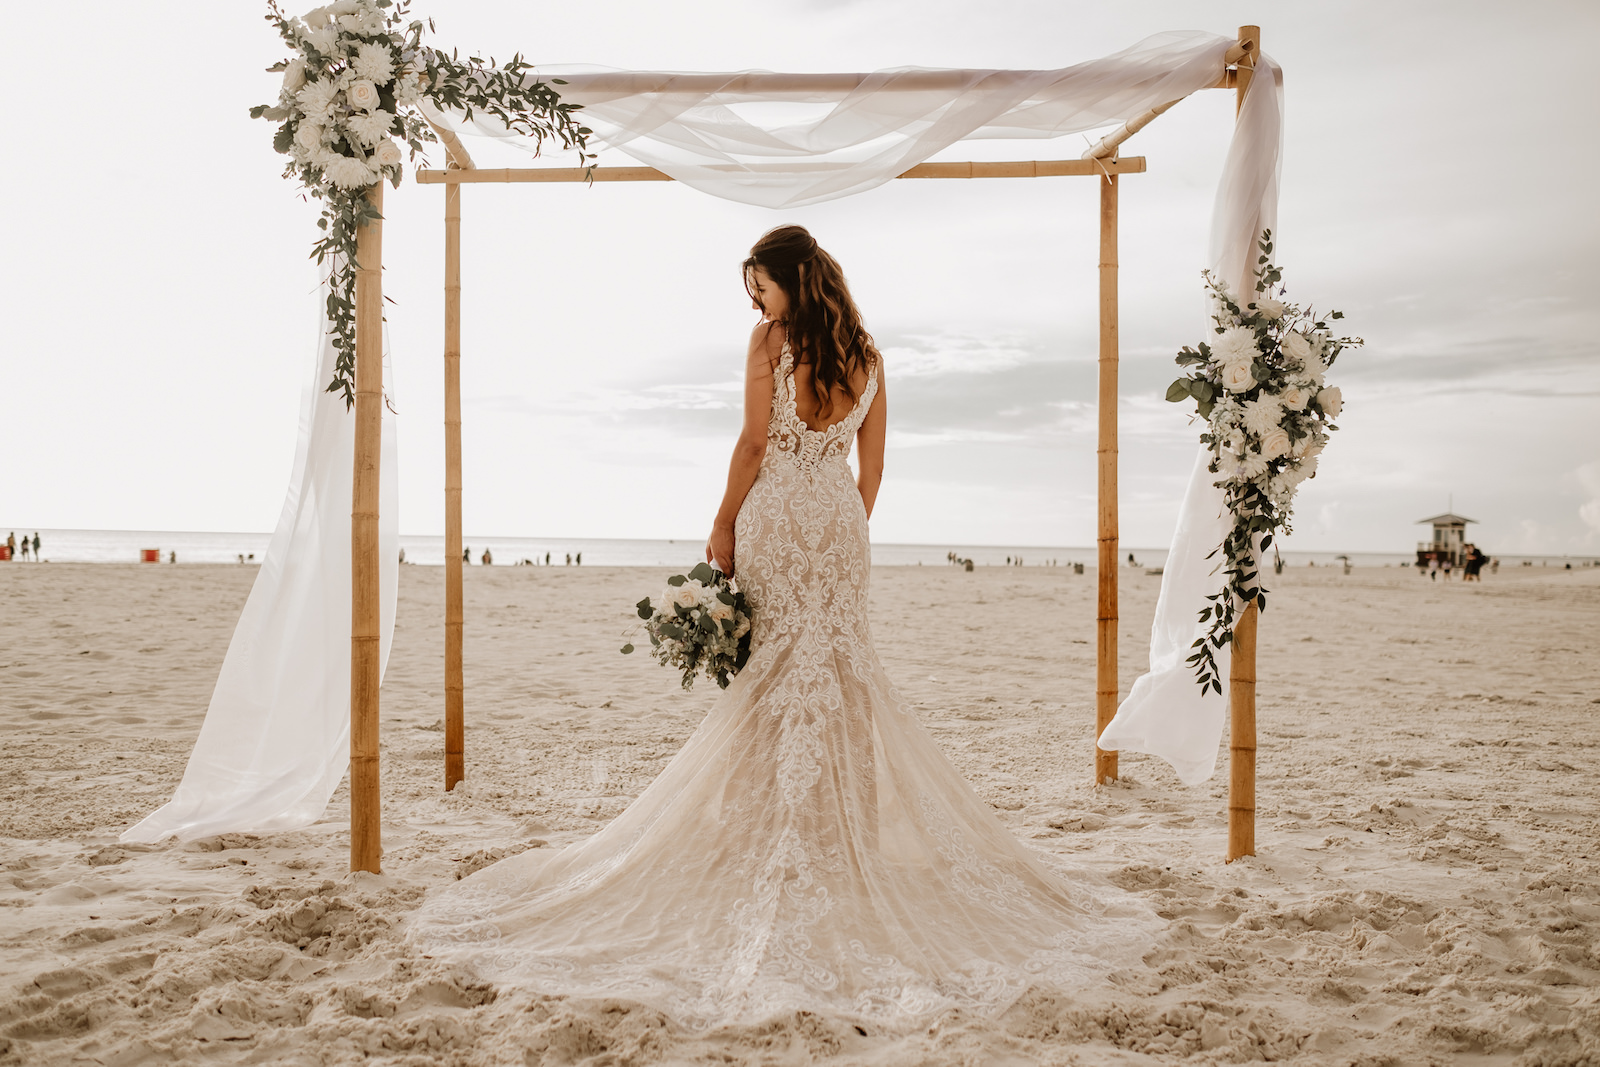 Beach Wedding Ceremony Venue at Hilton Clearwater Beach | White Folding Garden Chairs and Bamboo Arch with Sheer Draping and Greenery Floral Arrangement Tie Backs with White Roses Chrysanthemums and Stock | Allure Bridals Lace Low Back Spaghetti Strap Sheath Bridal Gown Wedding Dress